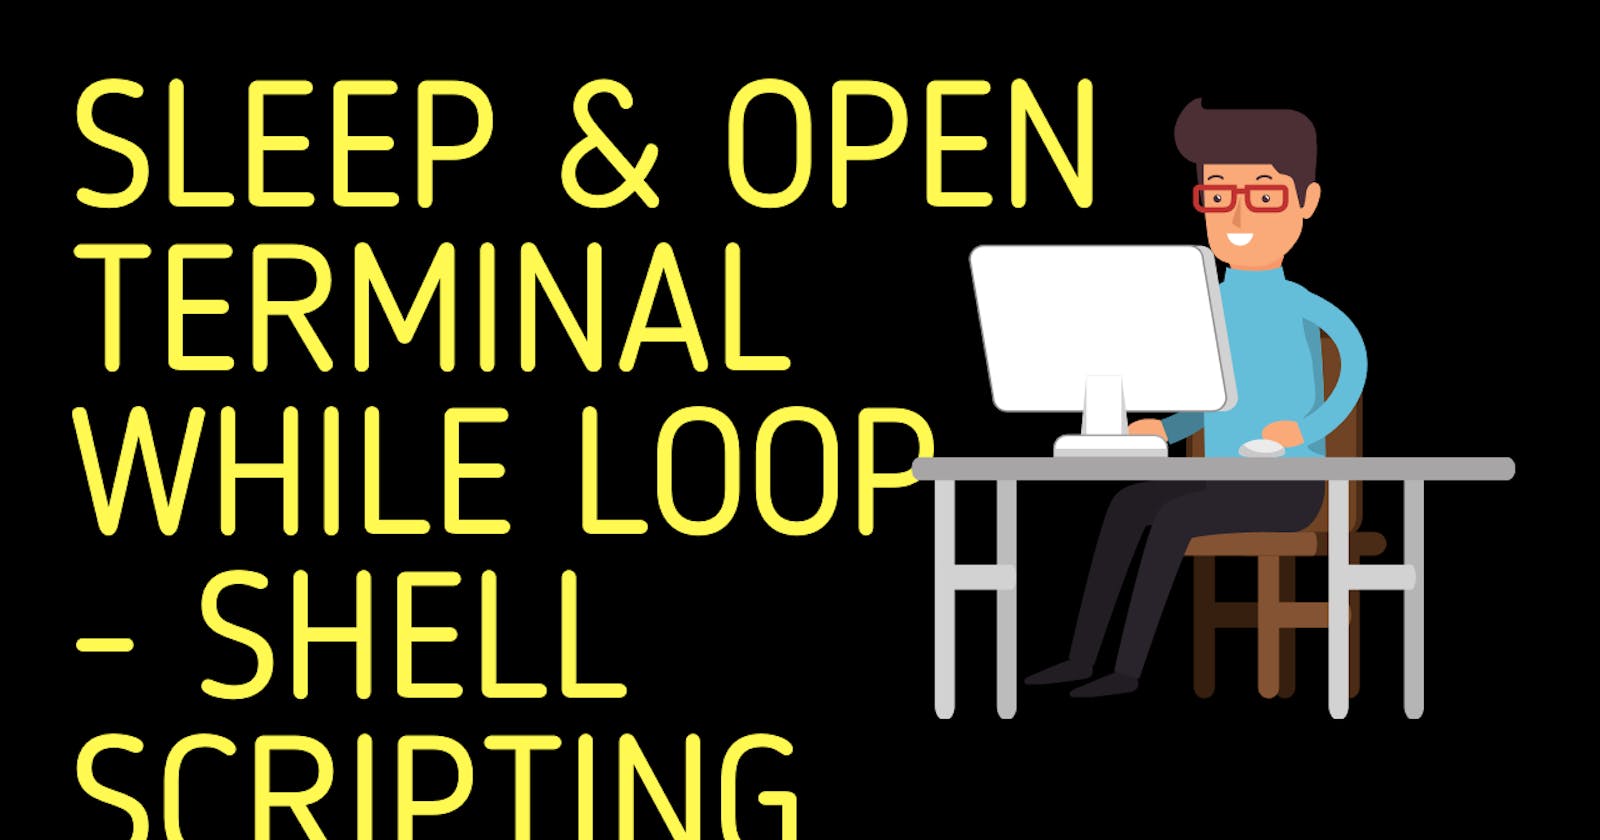 Sleep and Open Terminal using While Loop | Shell Scripting